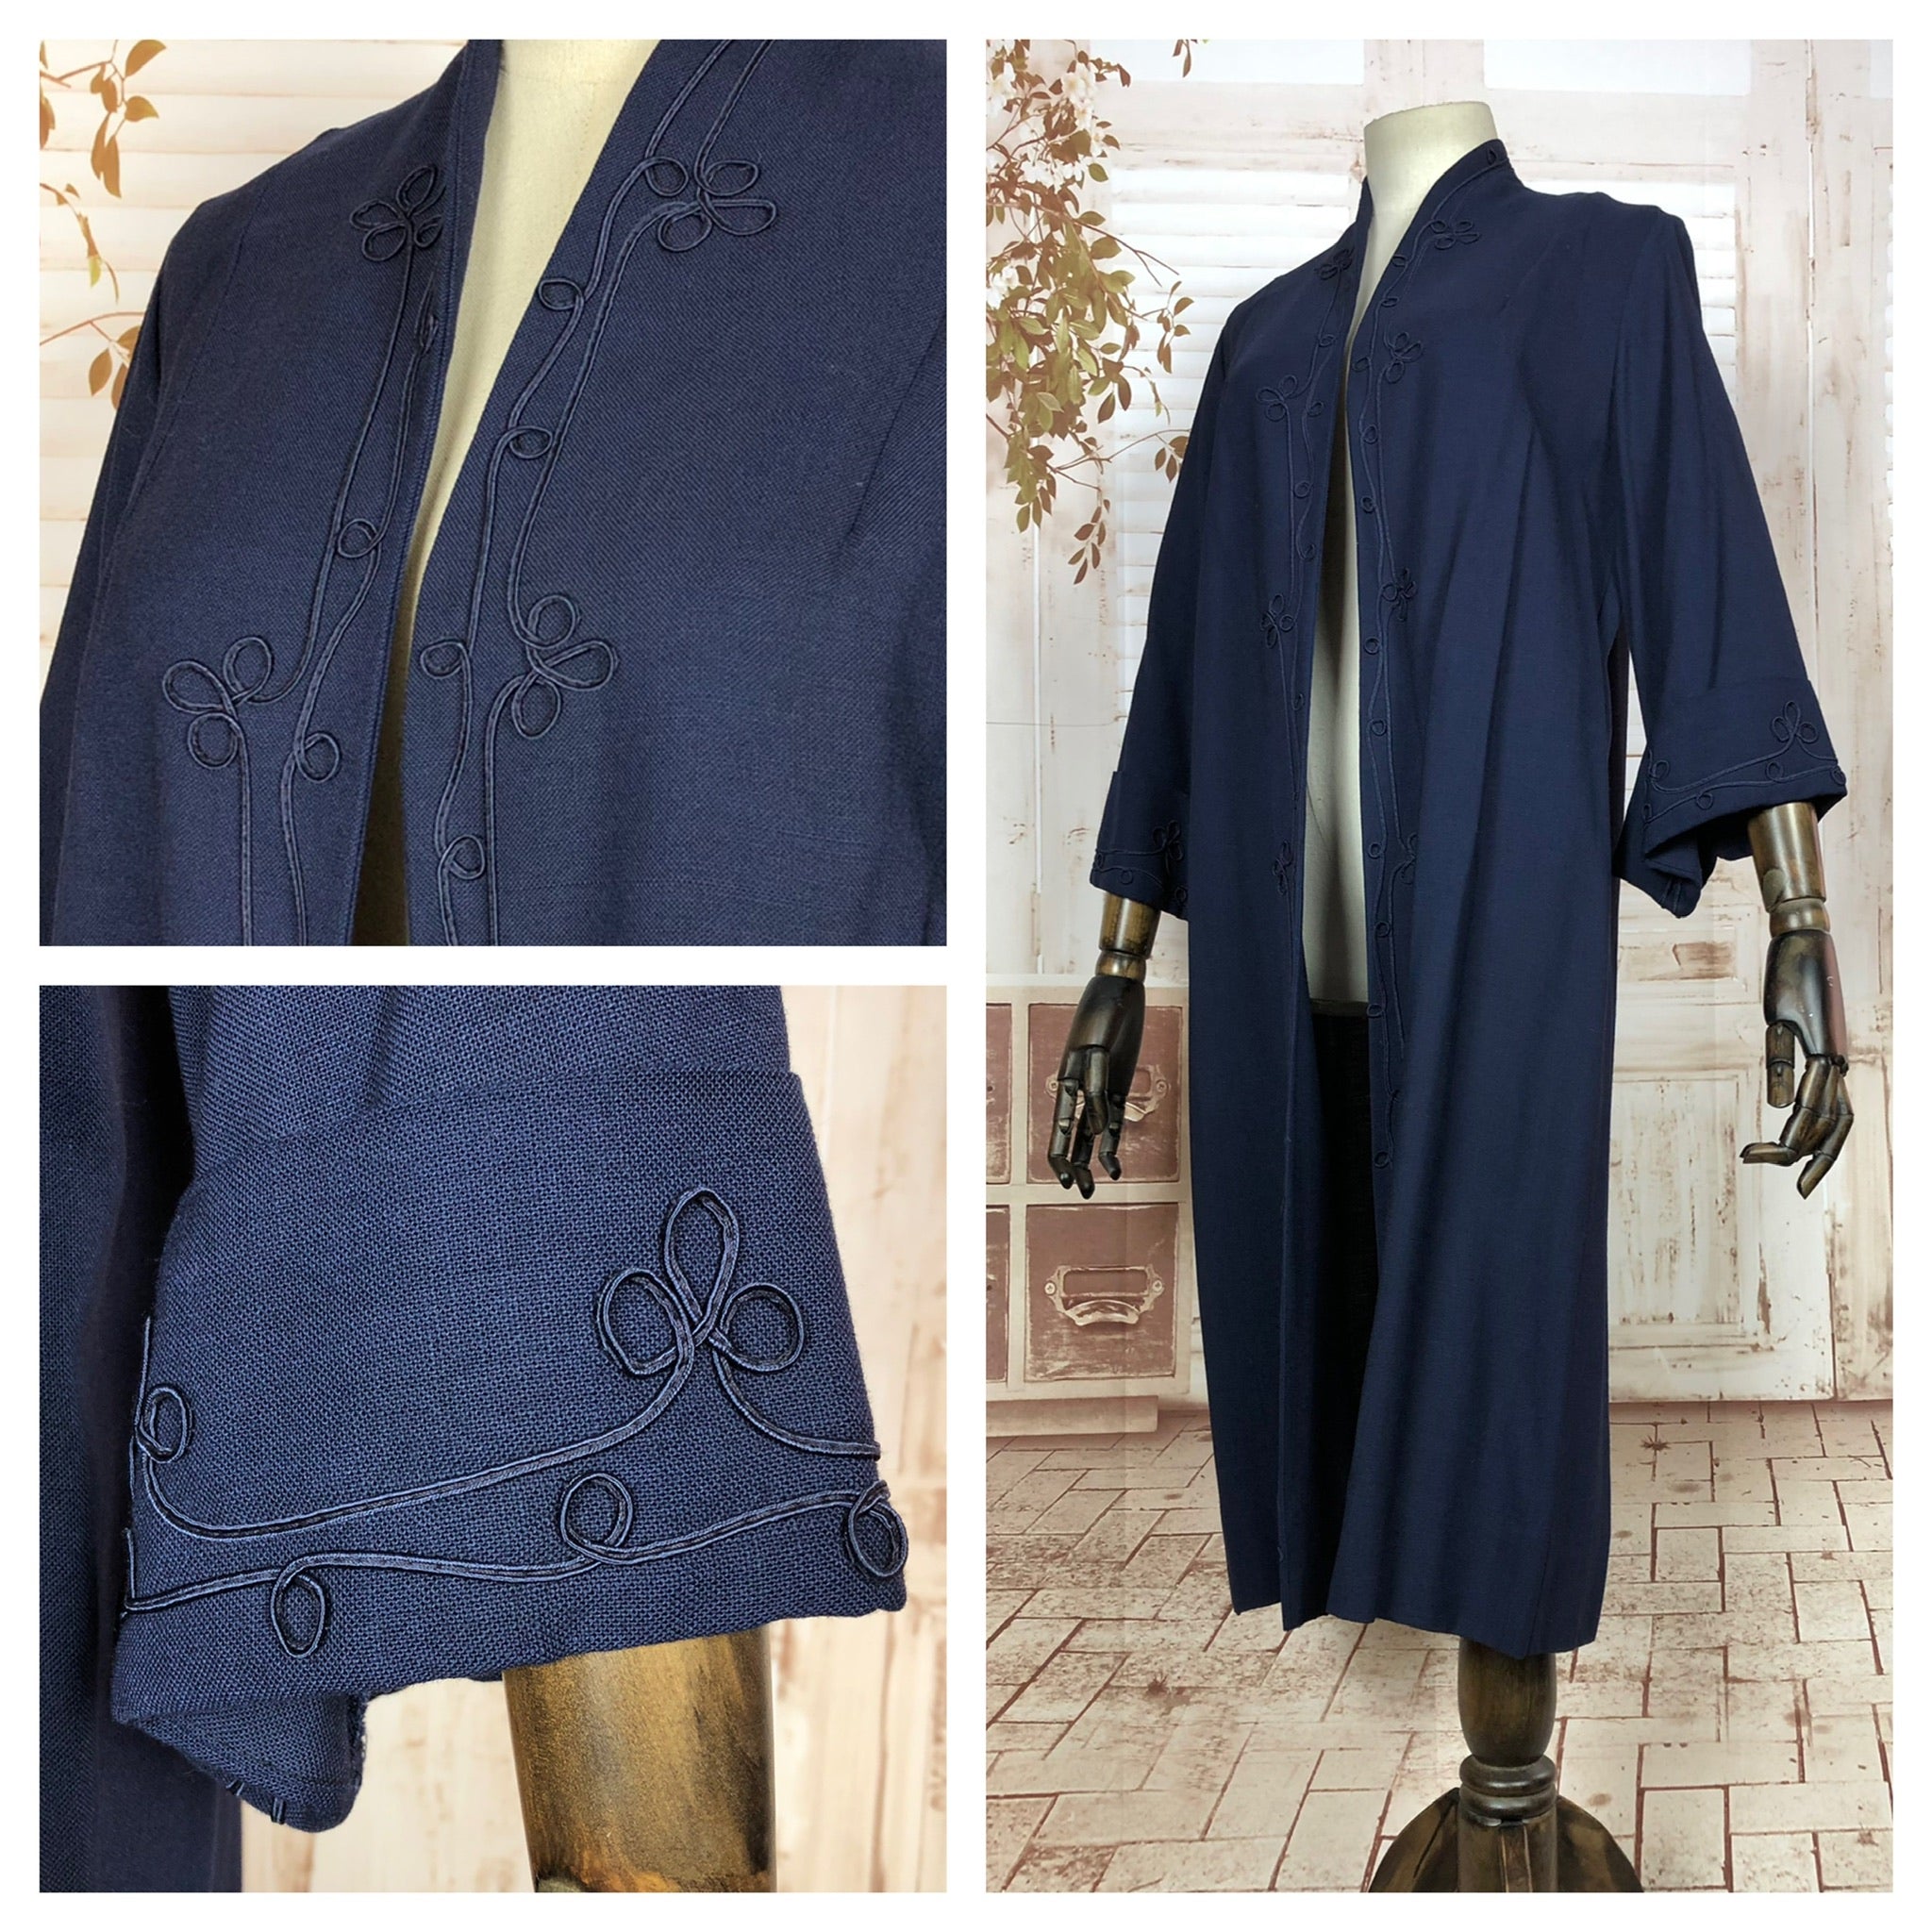 Fabulous Lightweight Late 1940s 40s / Early 1950s 50s Vintage Blue Clutch Coat With Soutache Embroidery